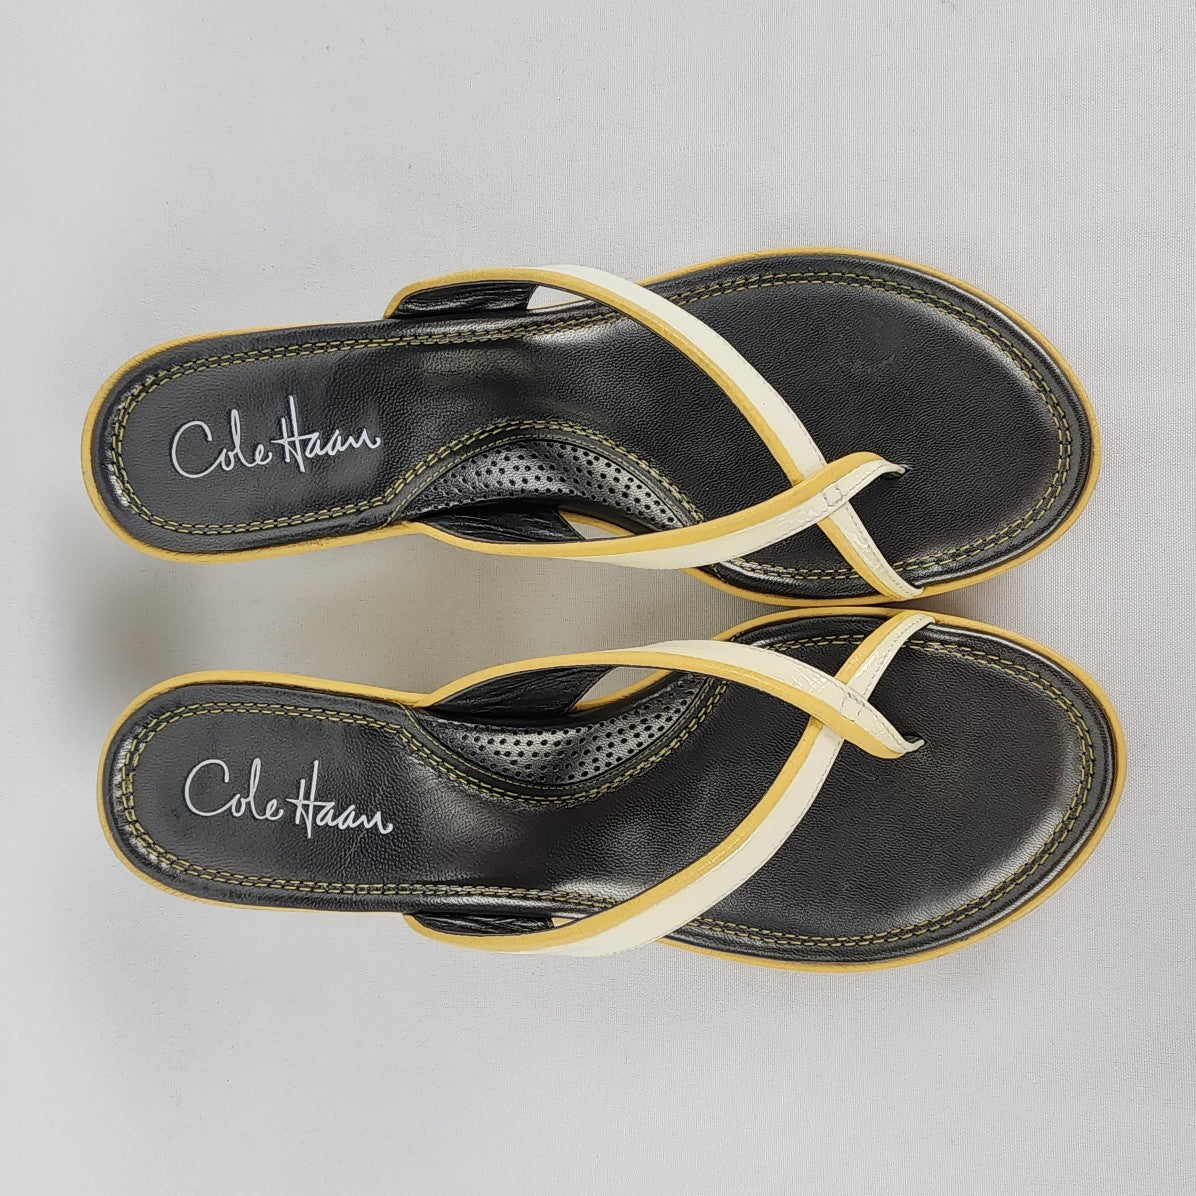 Cole Haan Nike Air Yellow & White Leather Wedge Sandals Size 9